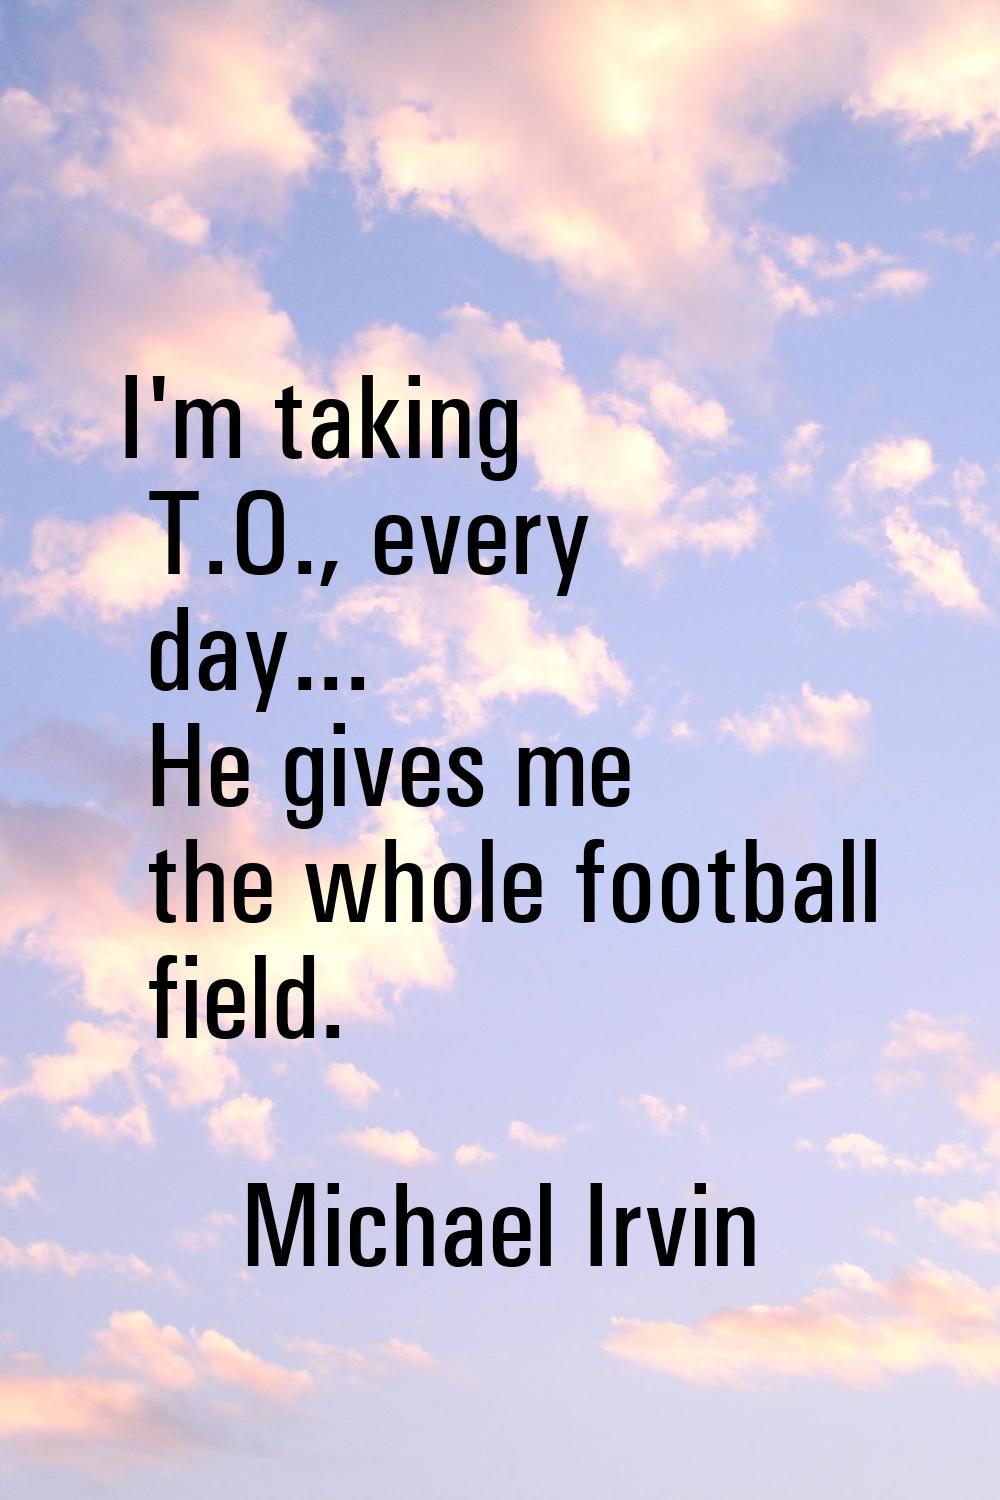 I'm taking T.O., every day... He gives me the whole football field.